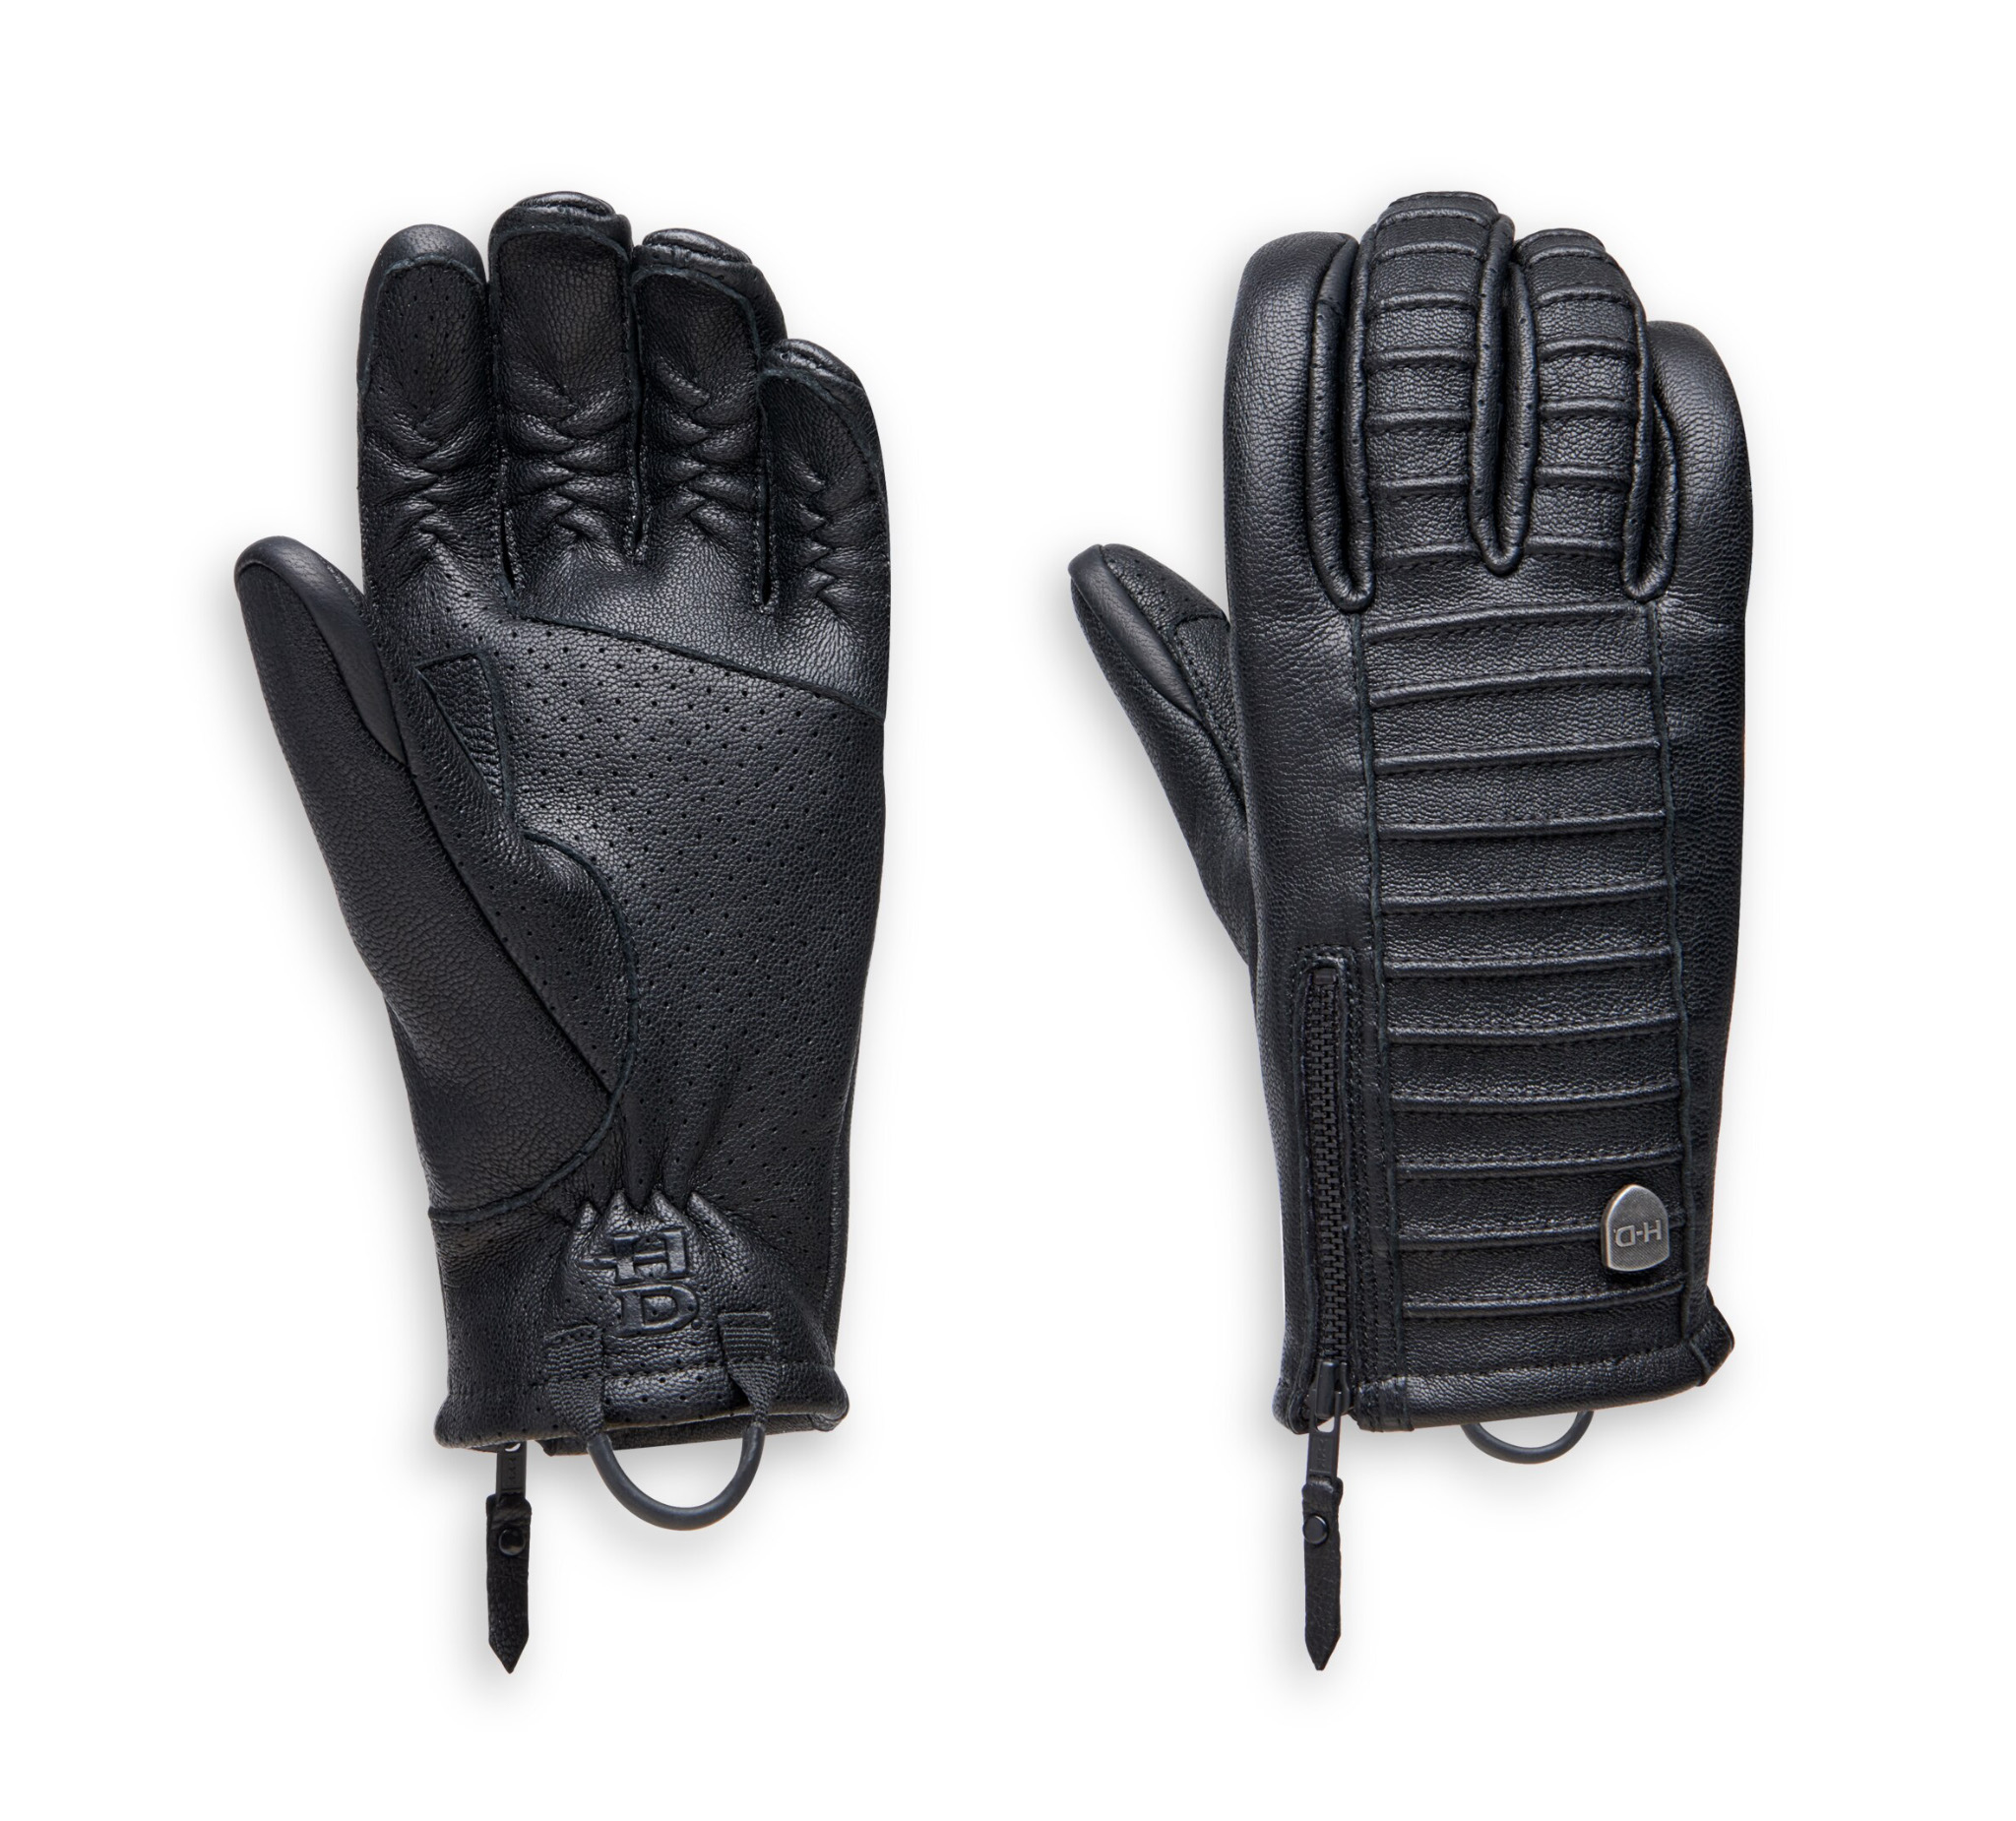 Harley Davidson Motorcycle Riding Gloves Promotion Off51